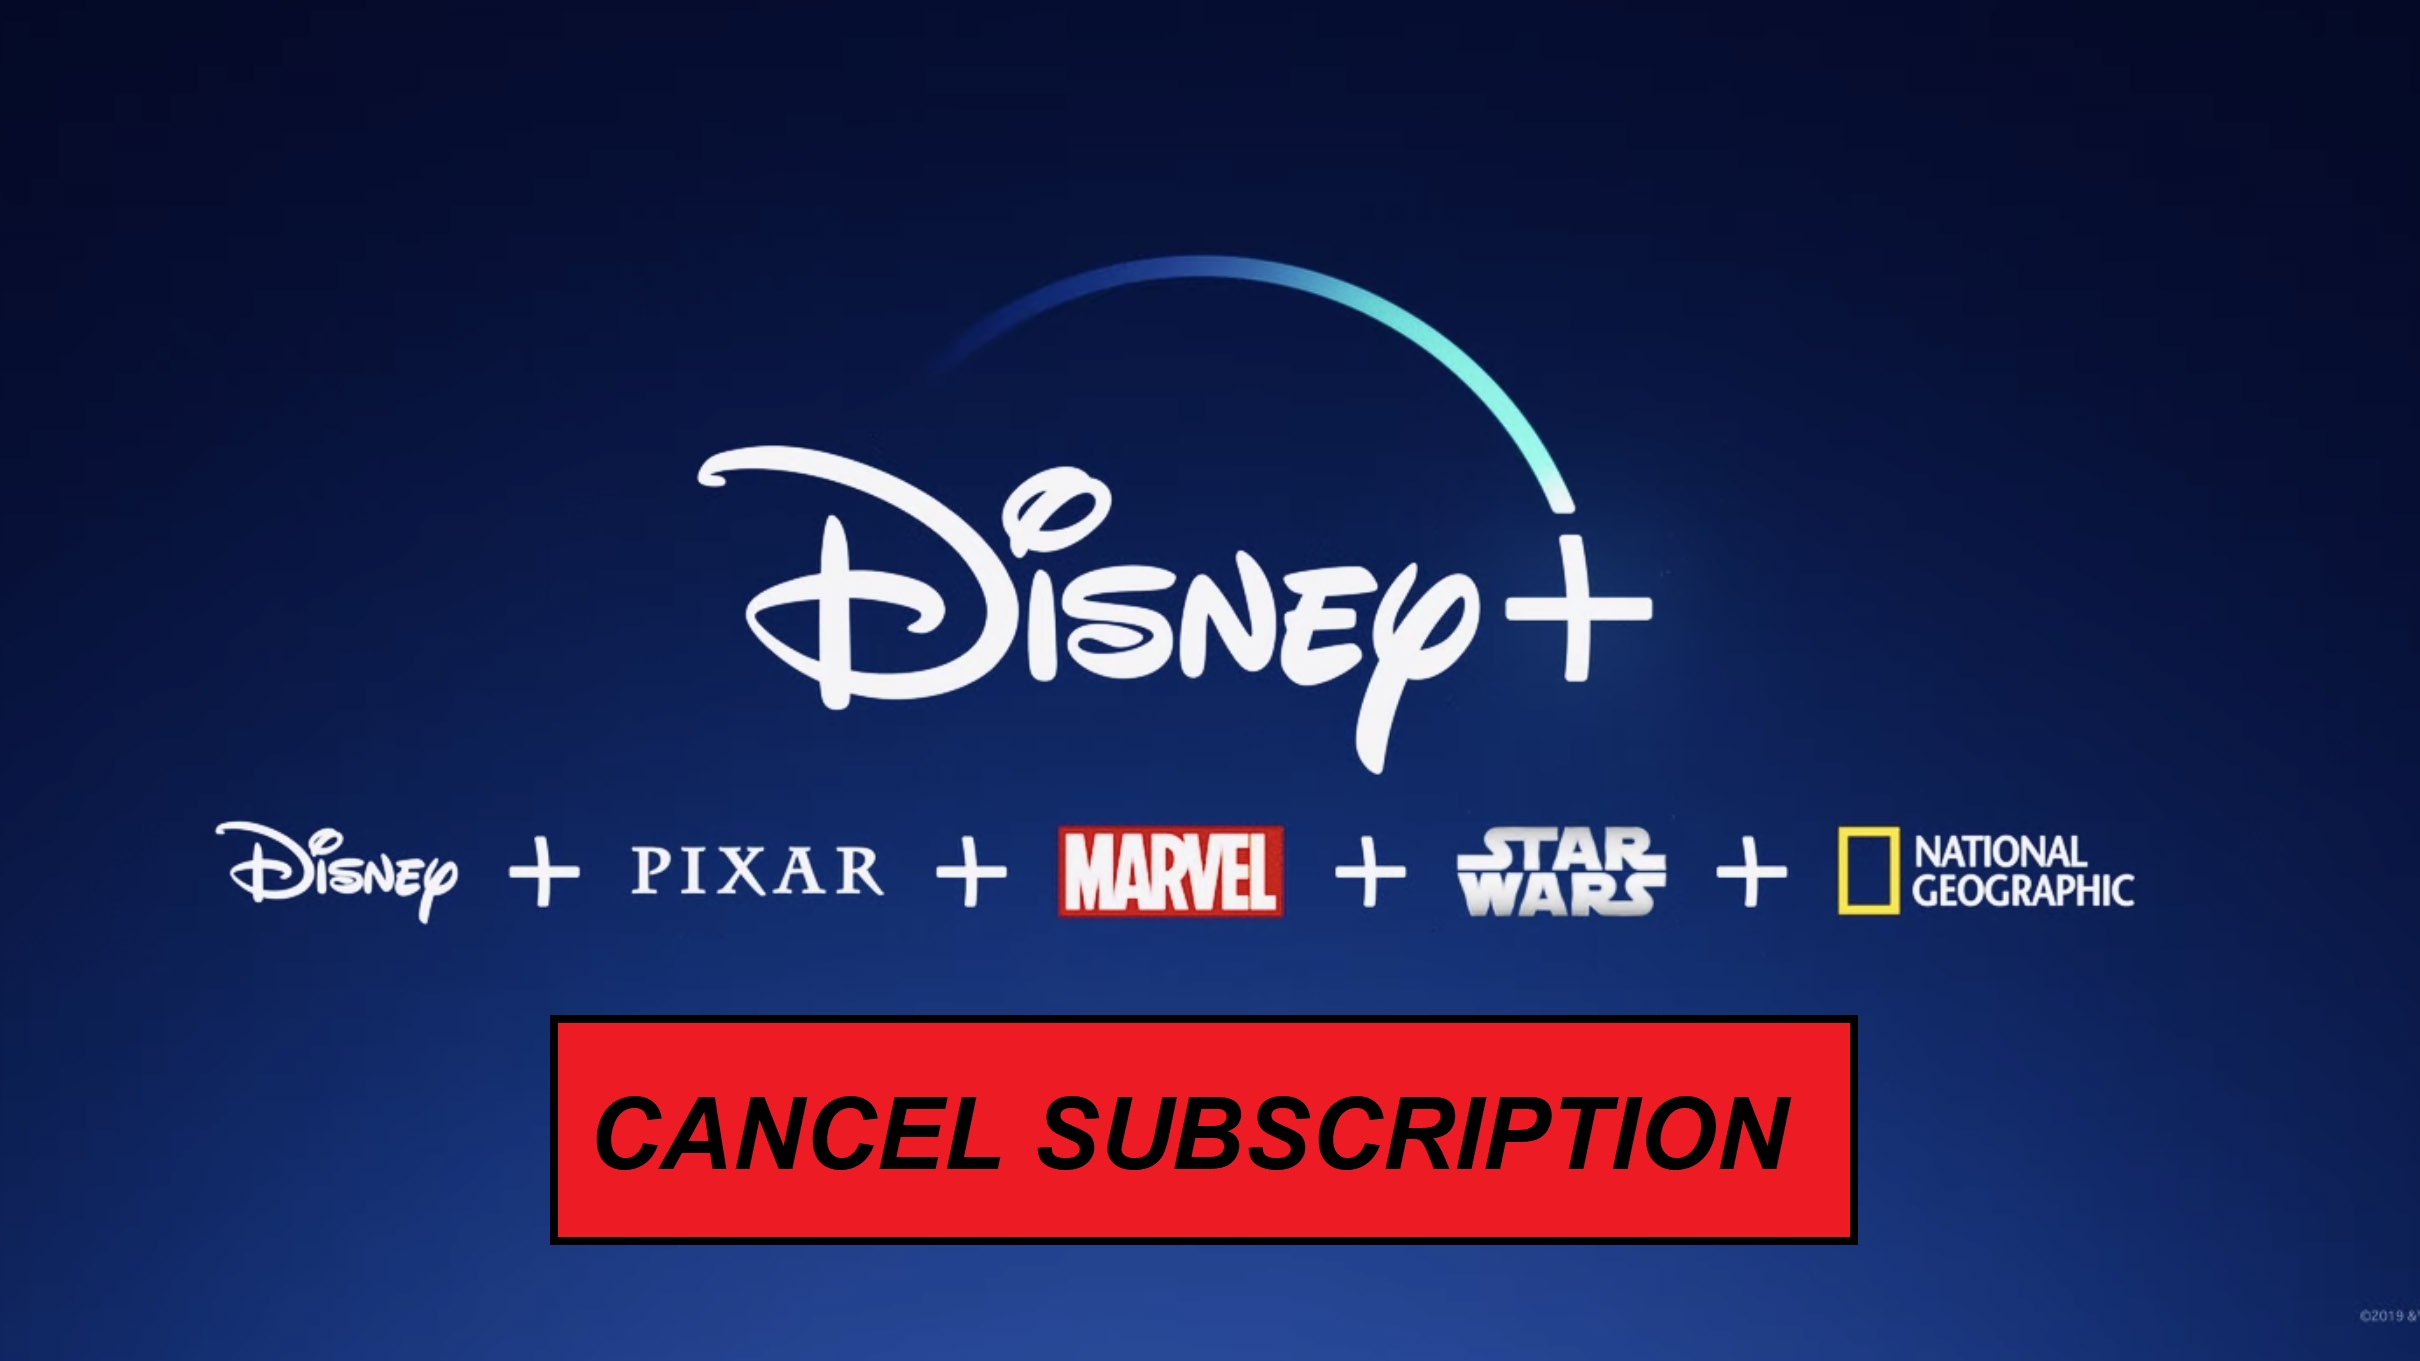 How to cancel Disney Plus Subscription in Easy Steps in 2022